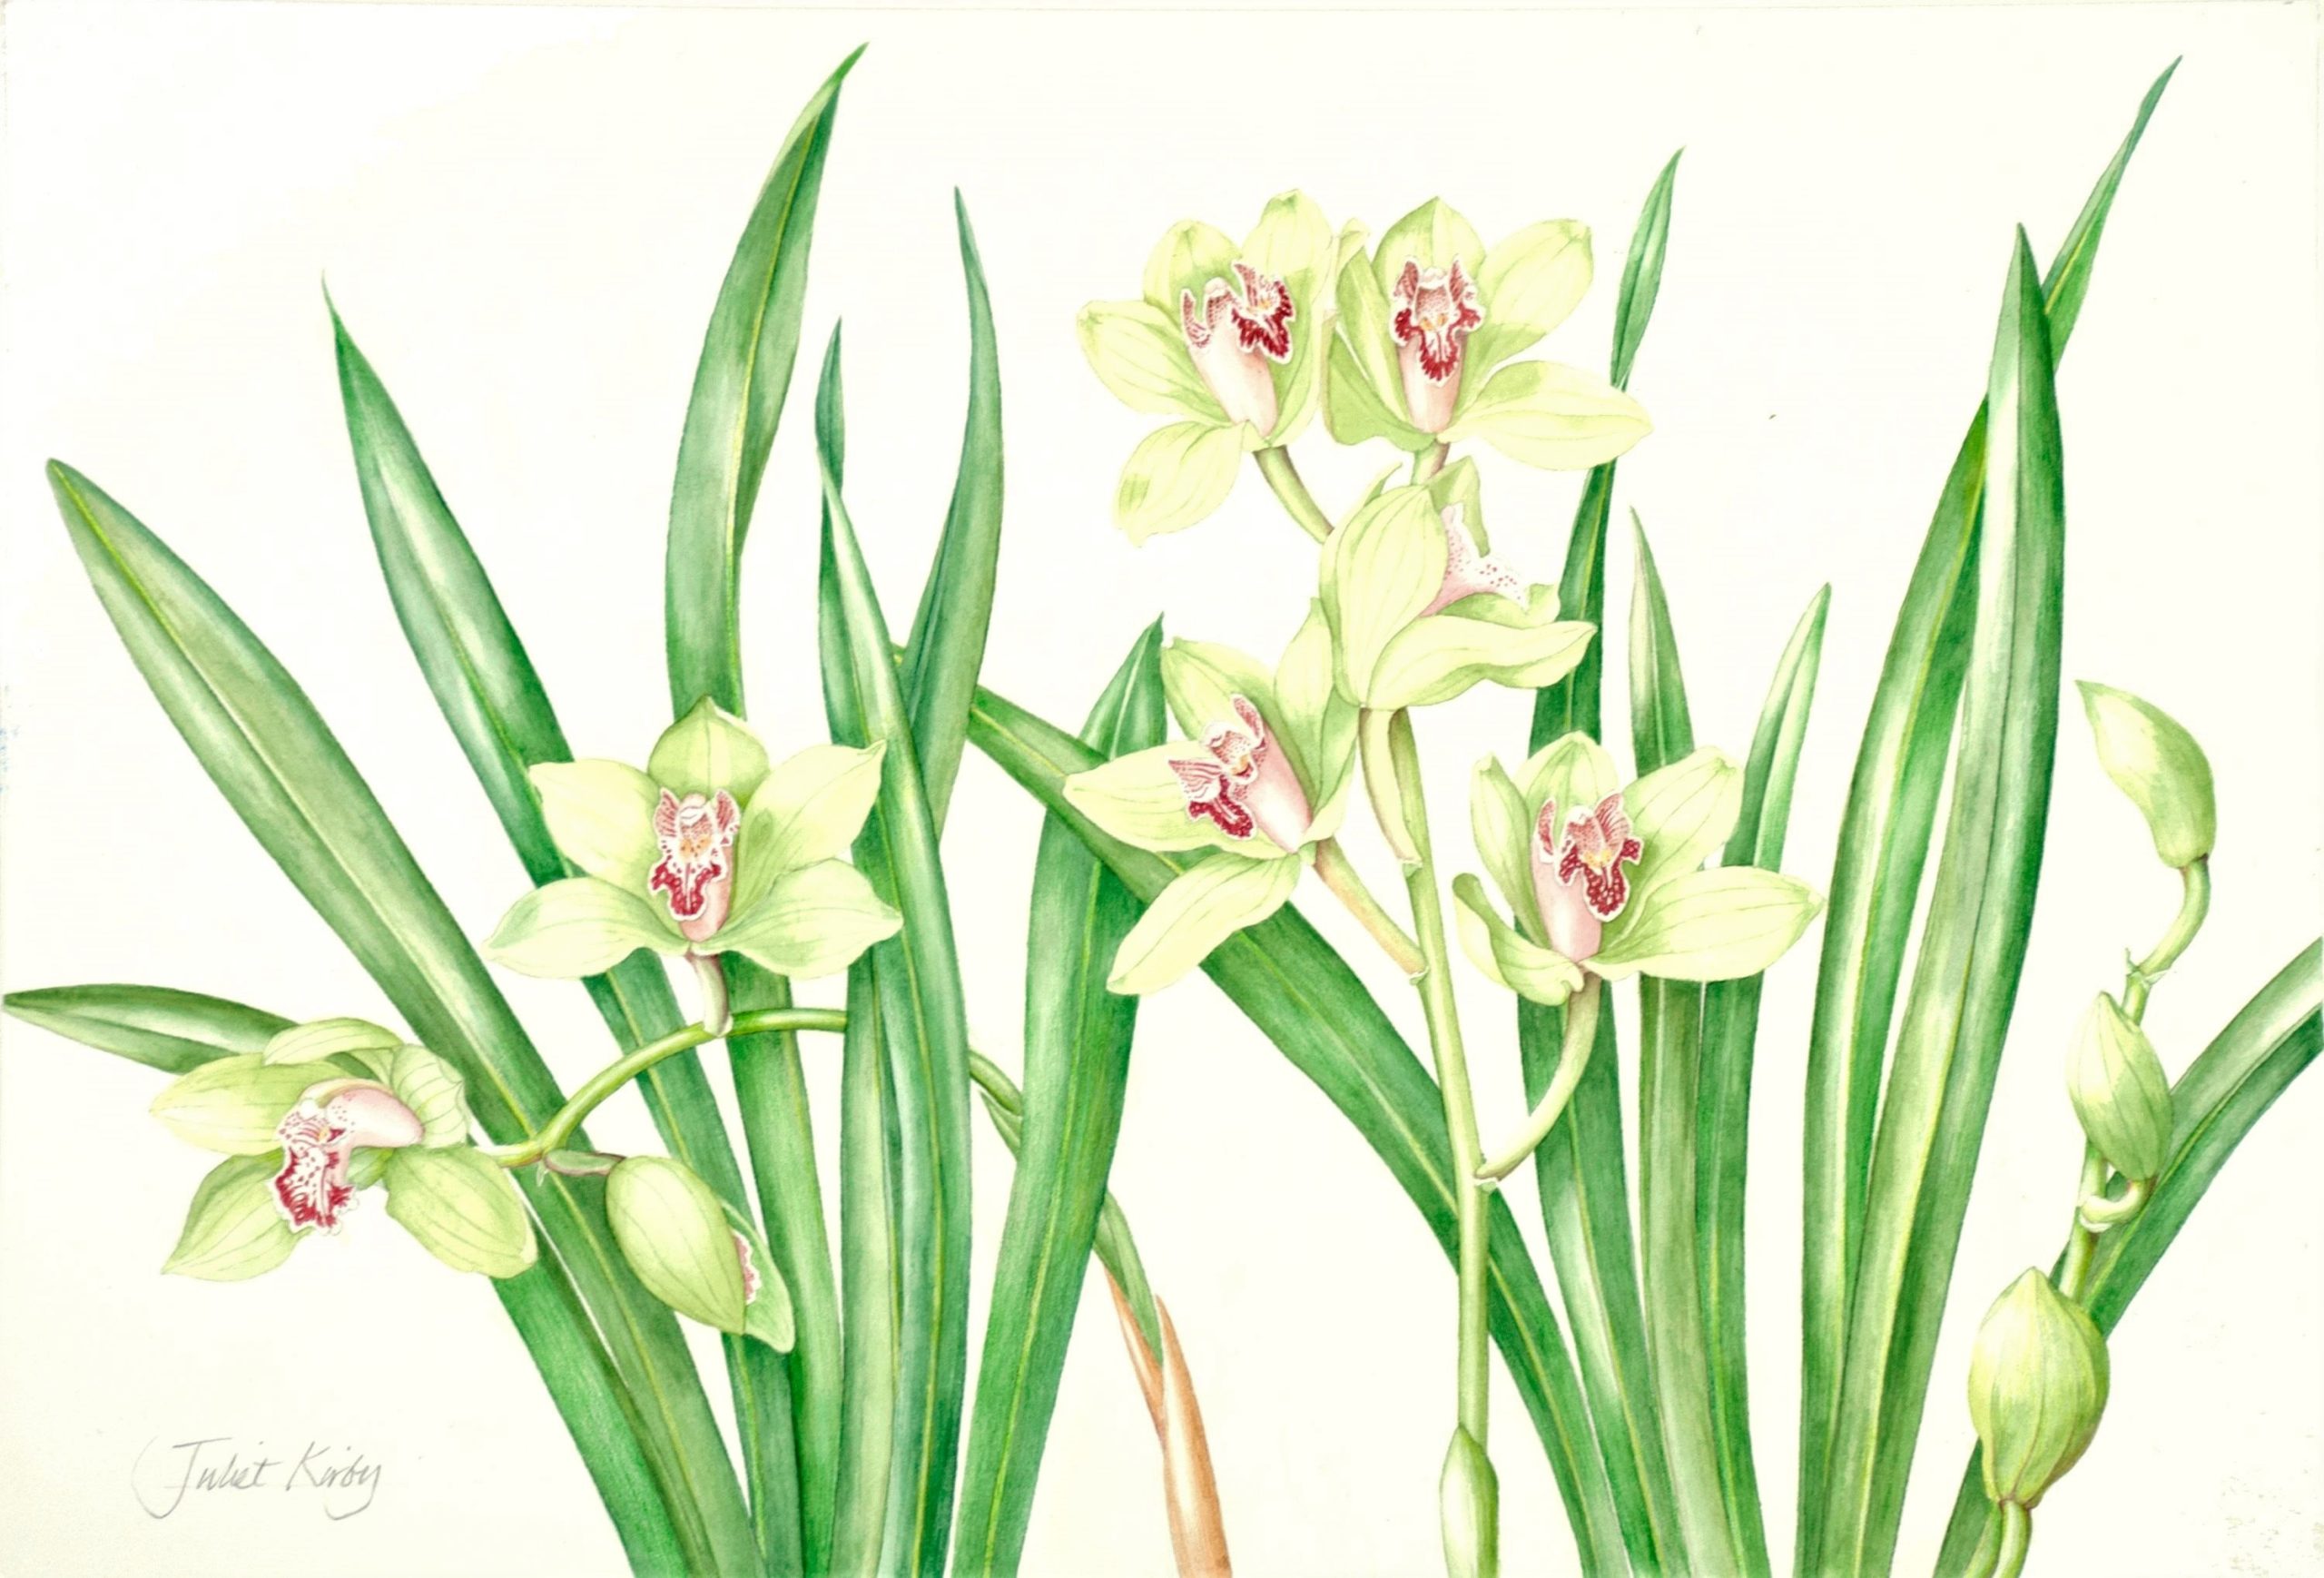 This art by Juliet Kirby is featured in our botanical illustration exhibit